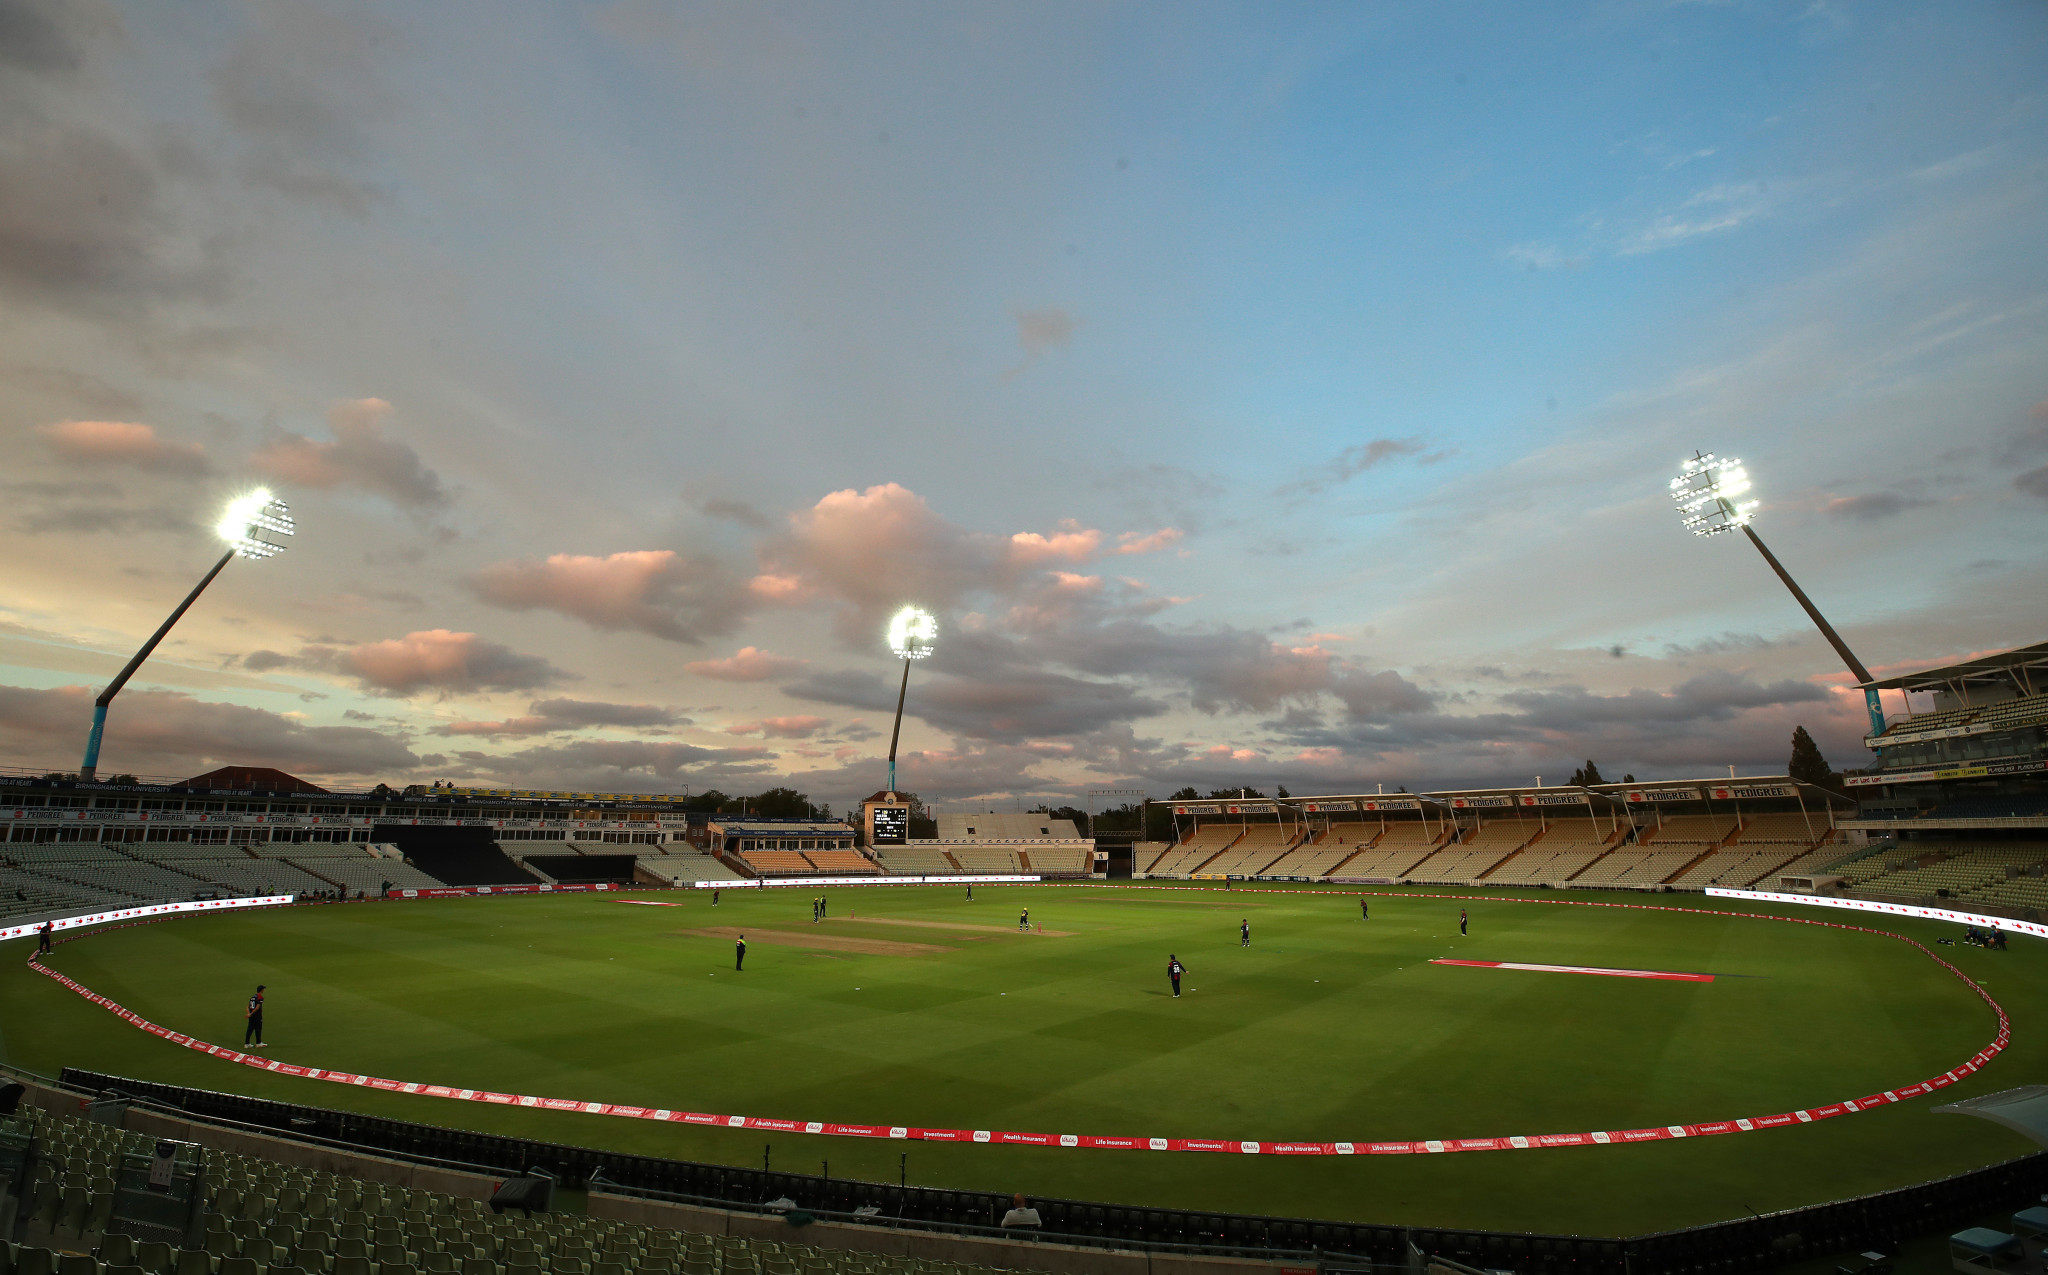 Edgbaston cricket ground will host the women's T20 competition at the Games ©Getty Images